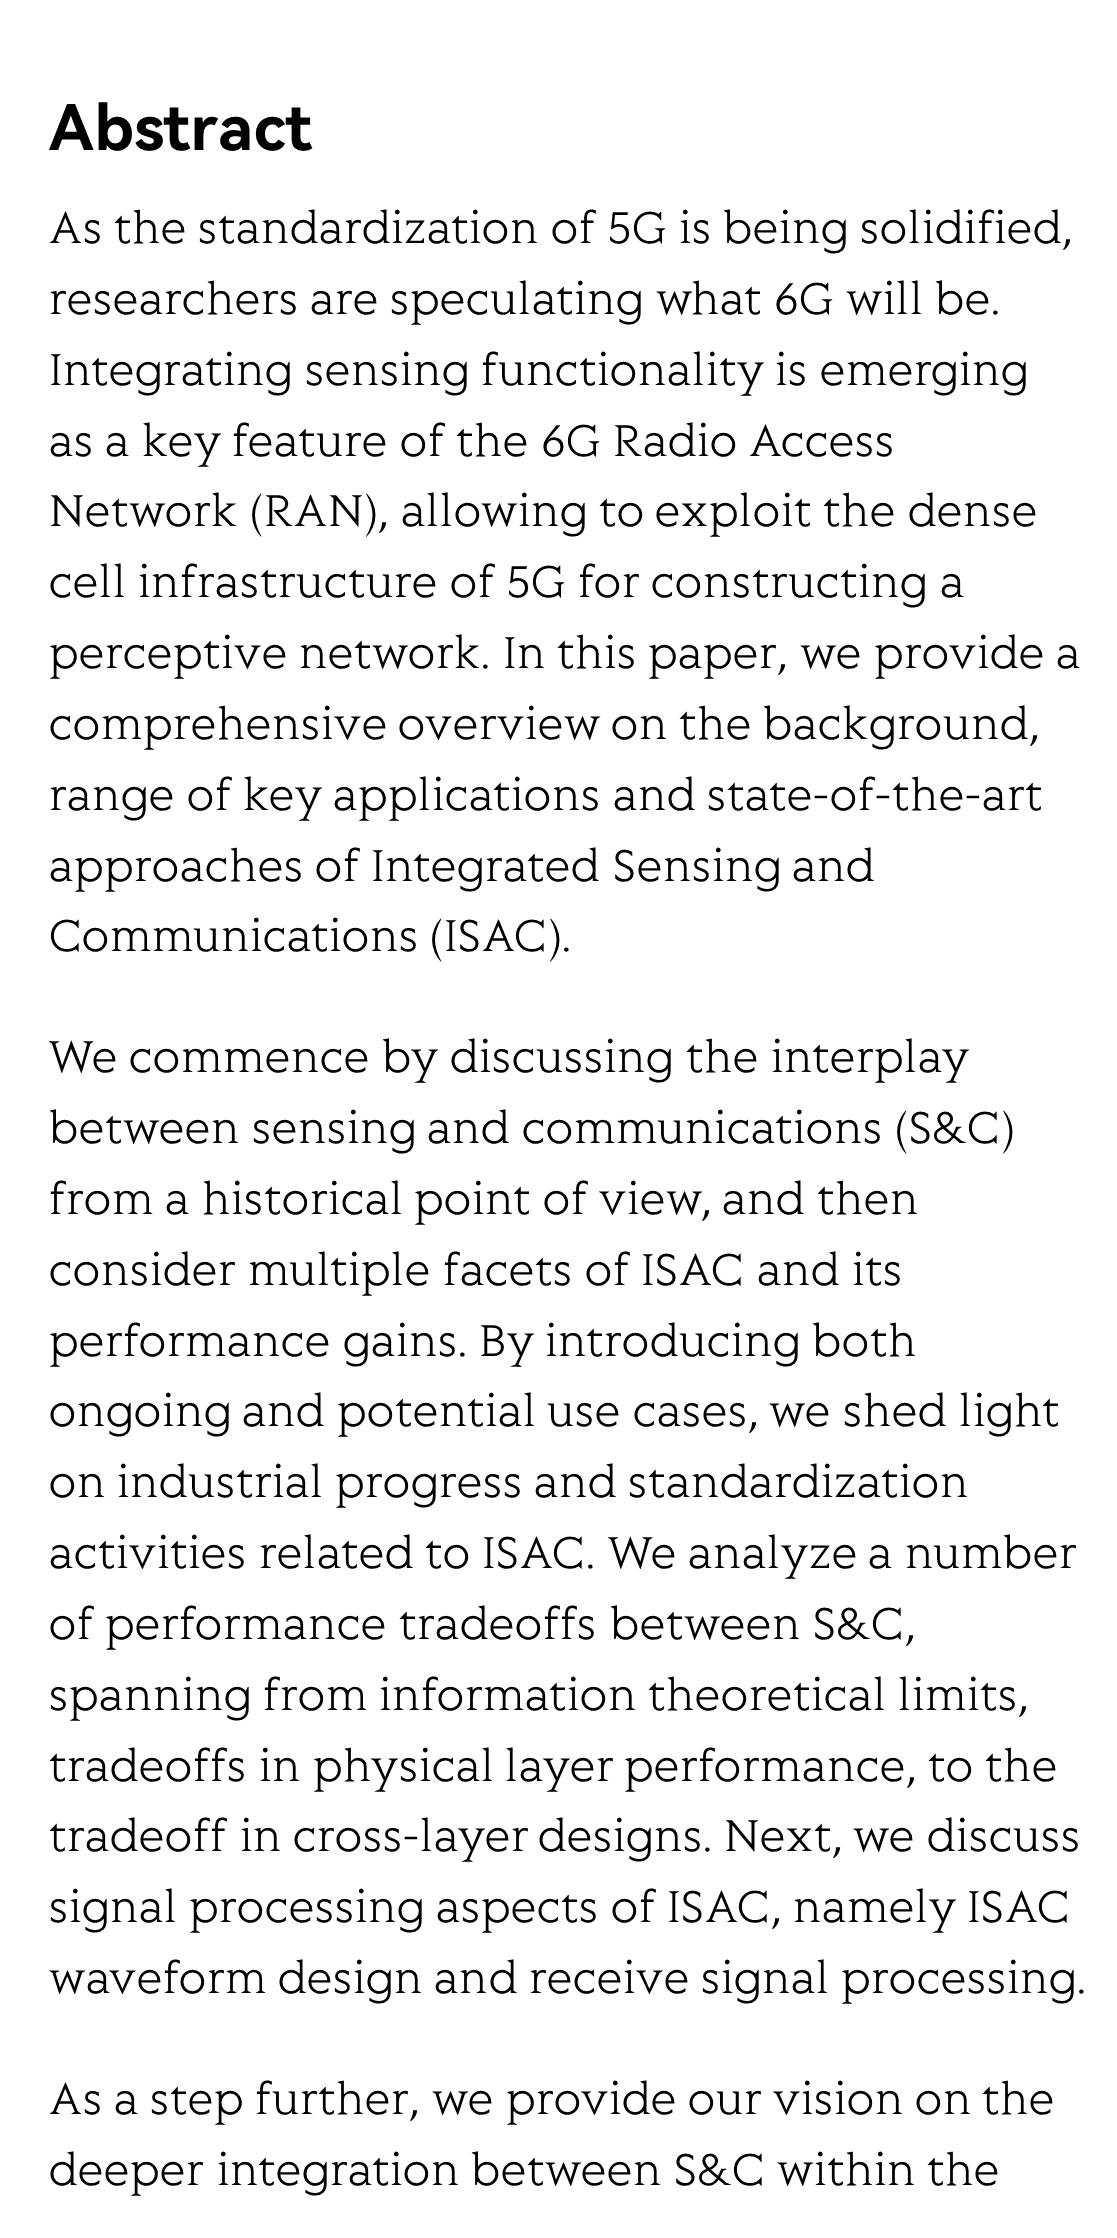 Integrated Sensing and Communications: Towards Dual-functional Wireless Networks for 6G and Beyond_2